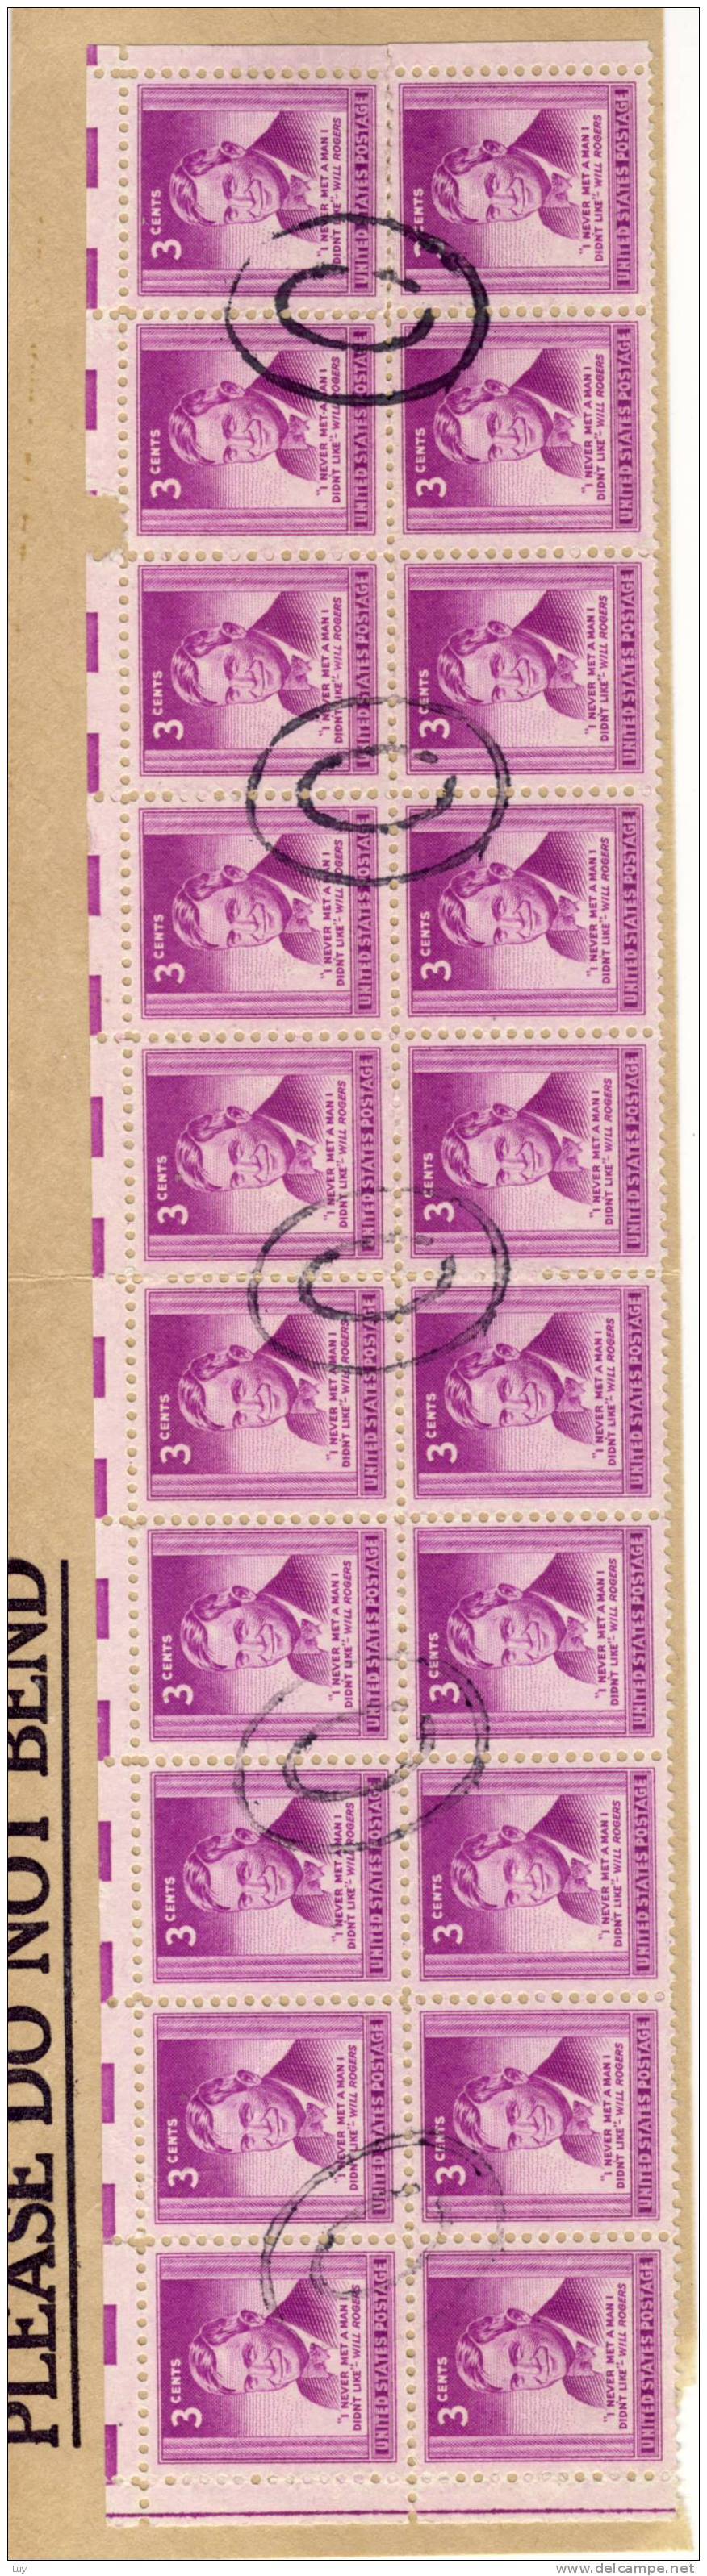 United States -scott N° 975 - Will Rogers - Used Stamp On Piece - Stripe Of 20 - Tiras Cómicas & Múltiples